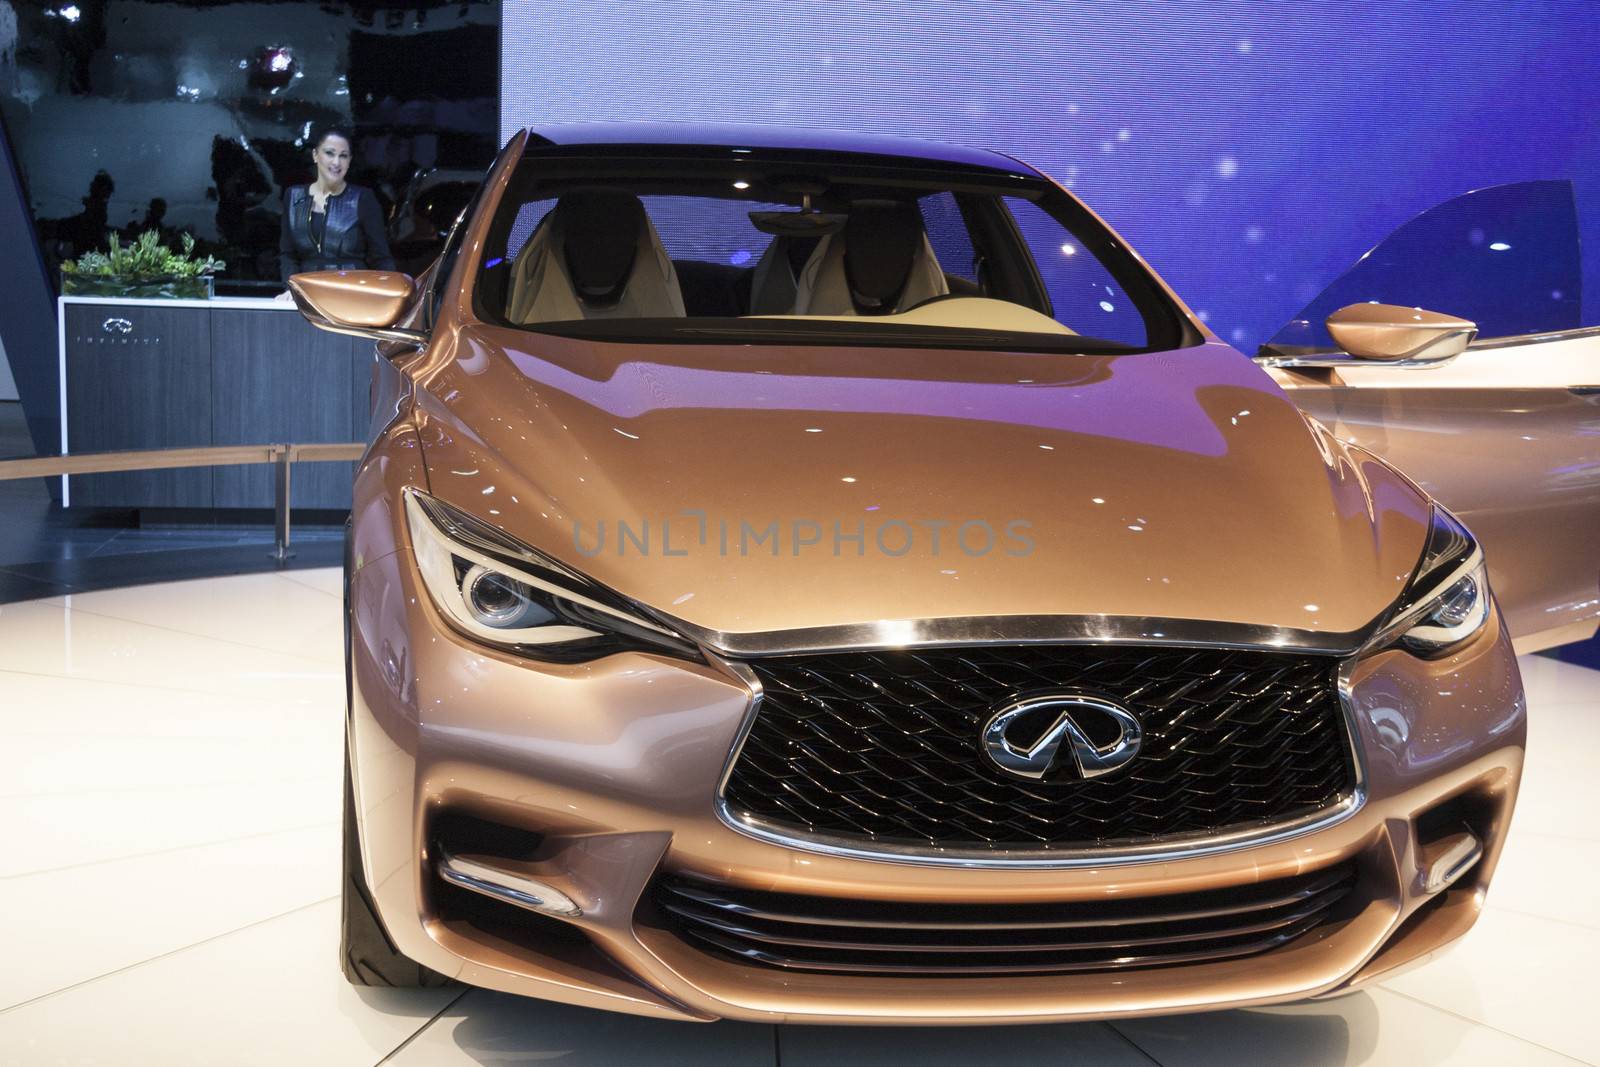 DETROIT - JANUARY 26 :The Infiniti Q3O concept at The North American International Auto Show January 26, 2014 in Detroit, Michigan.